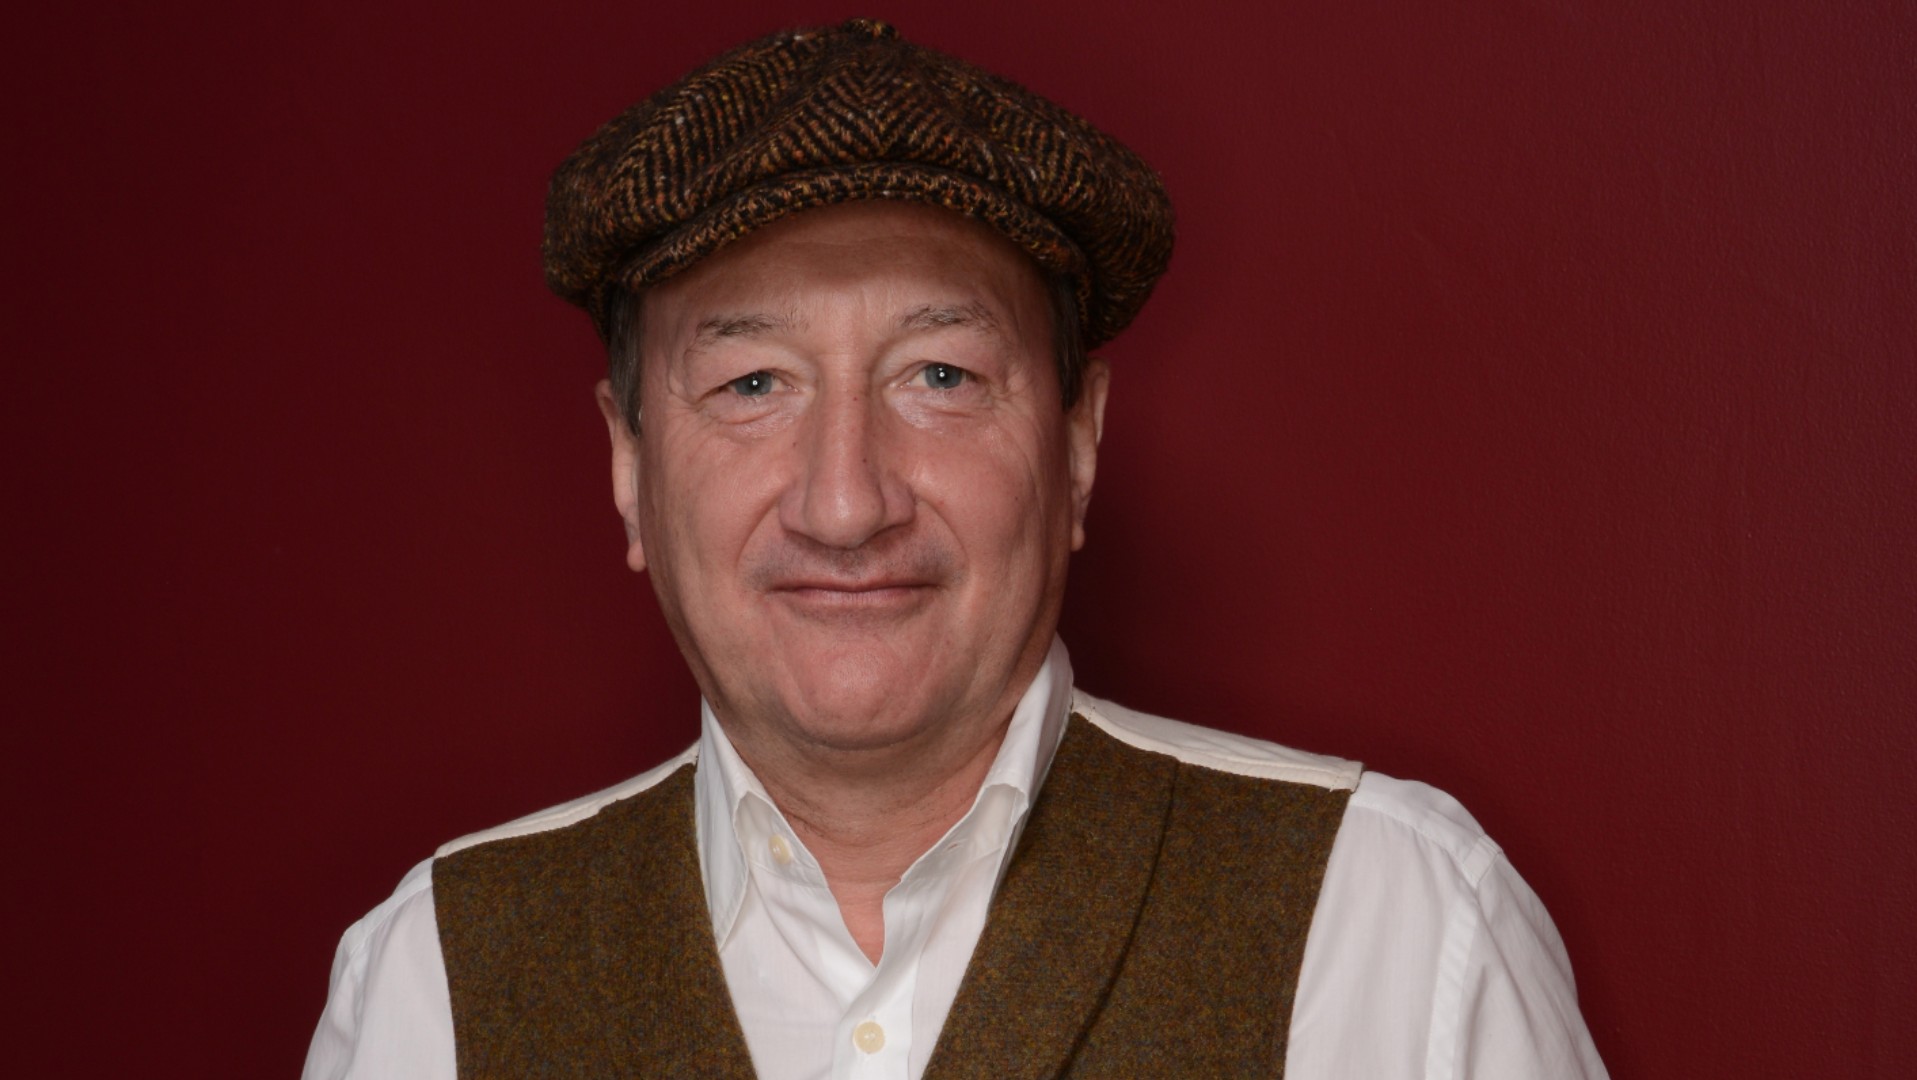 Steven Knight Discusses Bringing 'Peaky Blinders' Stage Show to U.S.